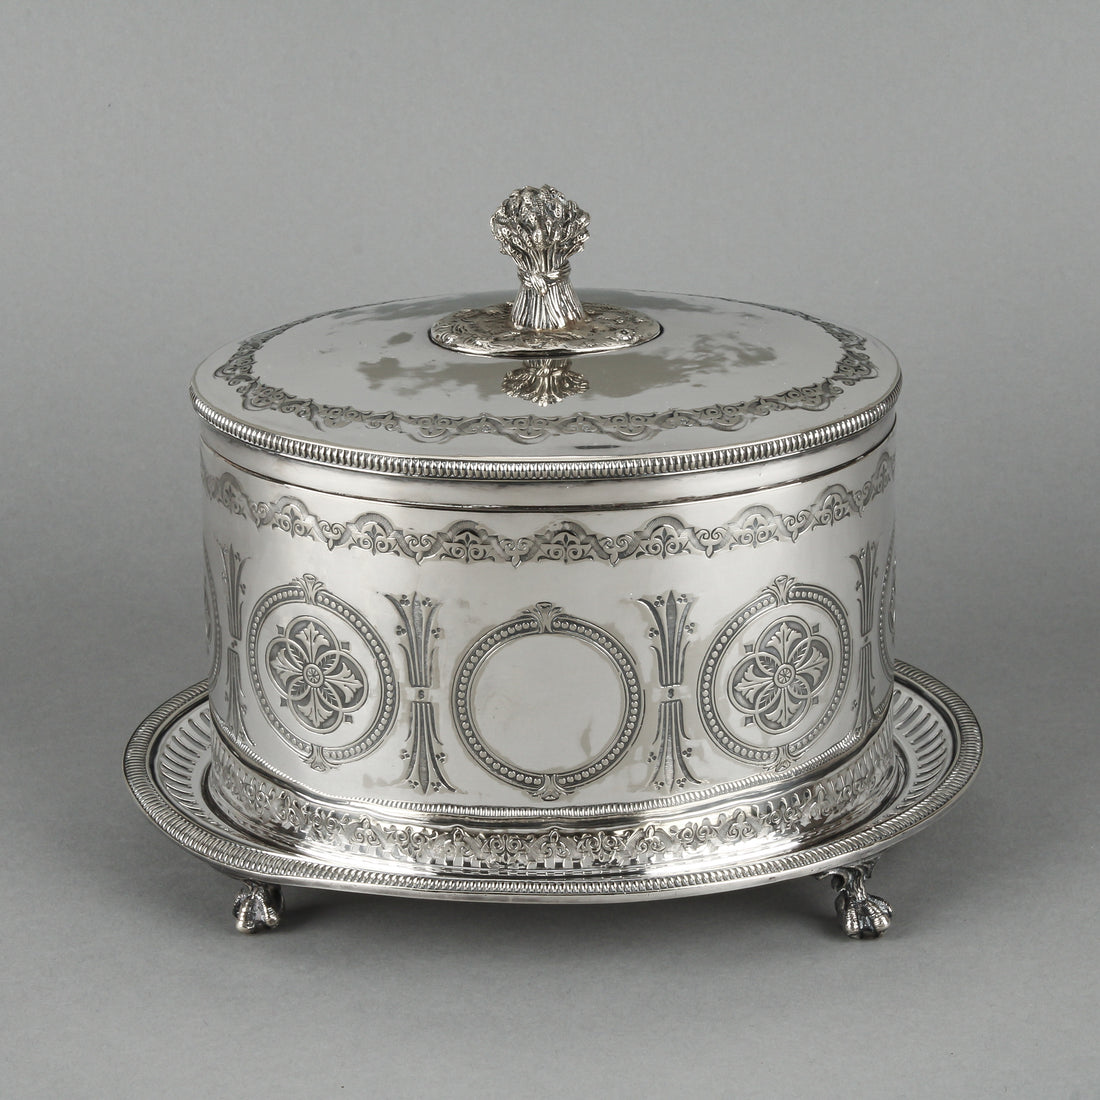 H. WILKINSON & CO. Silverplate Footed Biscuit Box